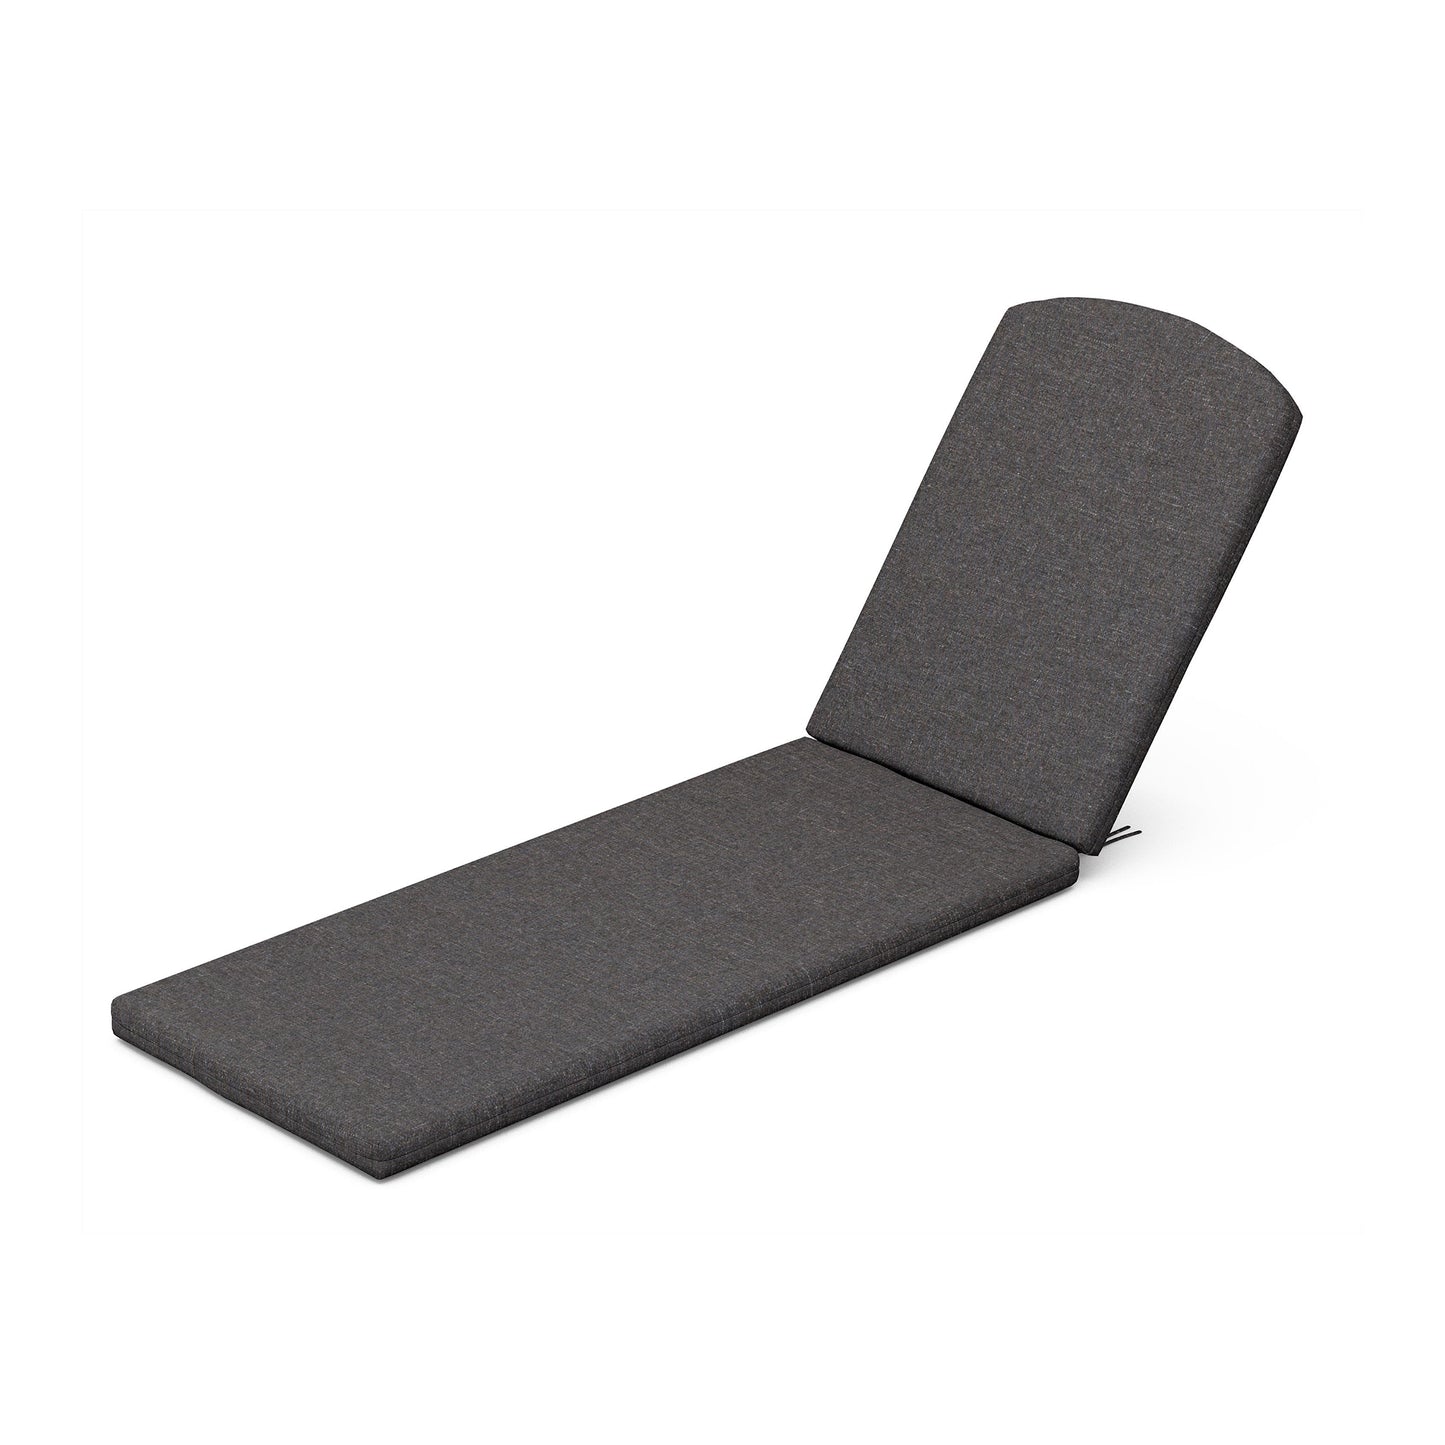 A comfortable and weather-resistant POLYWOOD XPWF0004 - Full Seat Cushion chaise lounge on a white background.